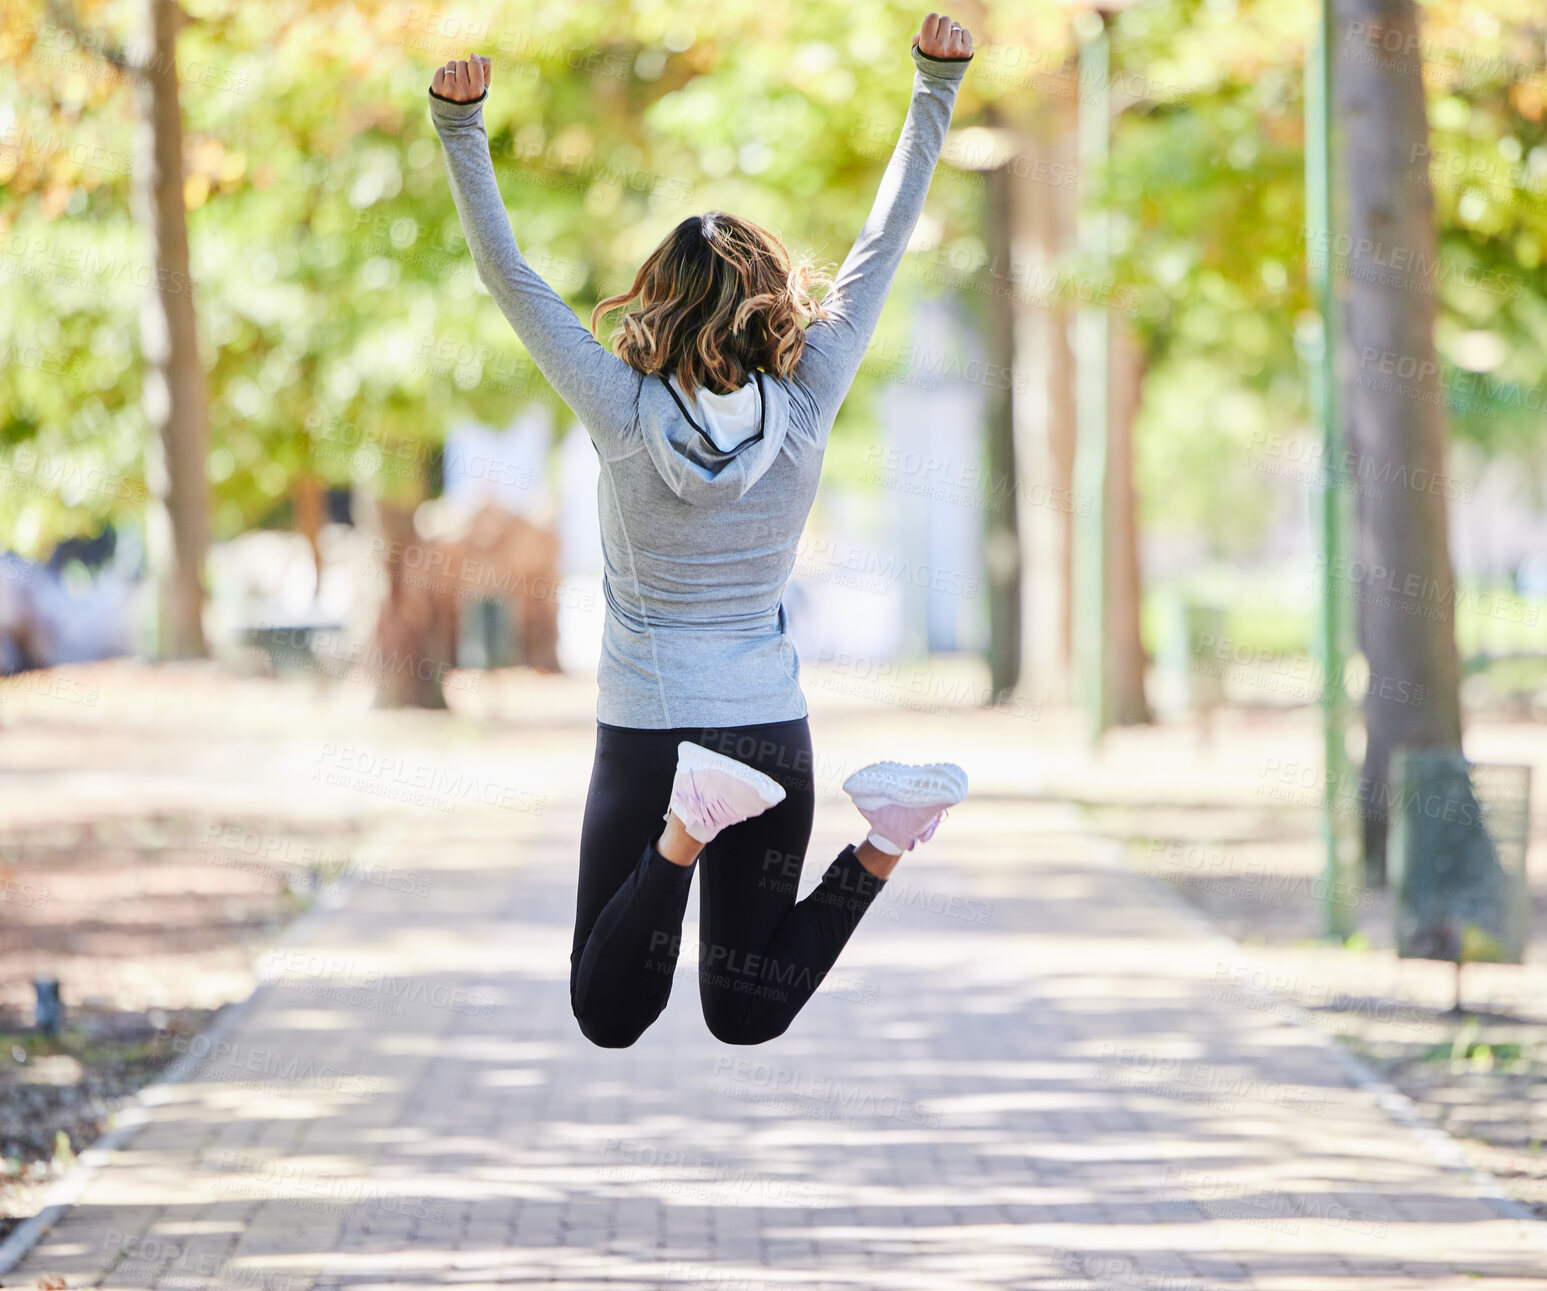 Buy stock photo Fitness, jump and a woman outdoor for success at a park to celebrate win or achievement. Back of young female person on a road in nature excited about workout, running or training goals or freedom